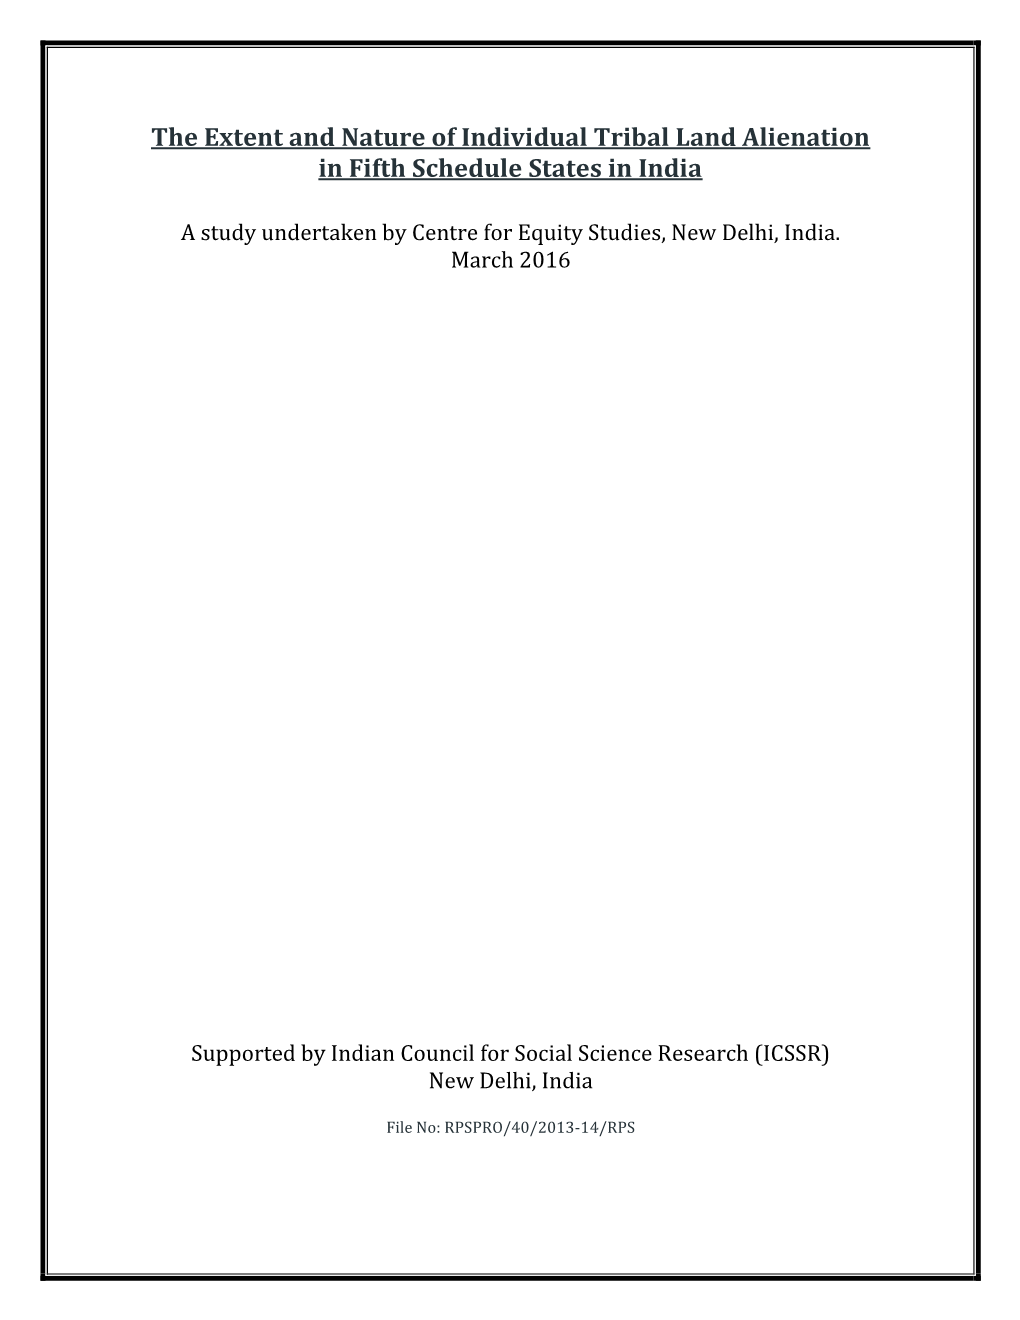 The Extent and Nature of Individual Tribal Land Alienation in Fifth Schedule States in India